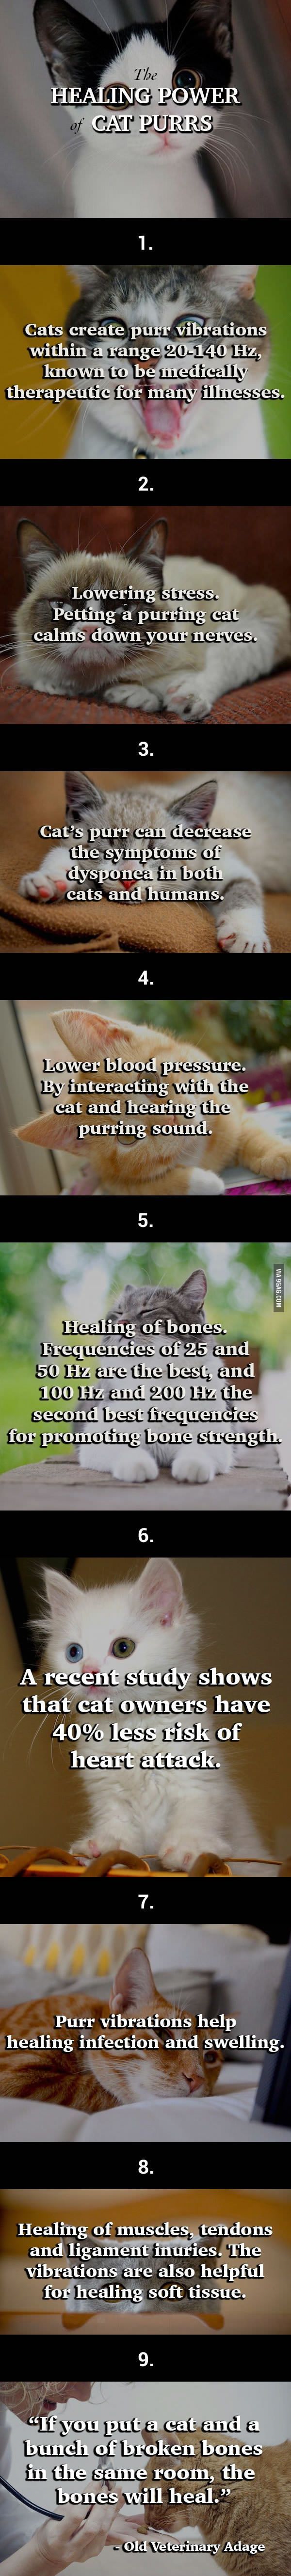 Trust Me! A Cat’s Purr May Help You Live A Longer Life!